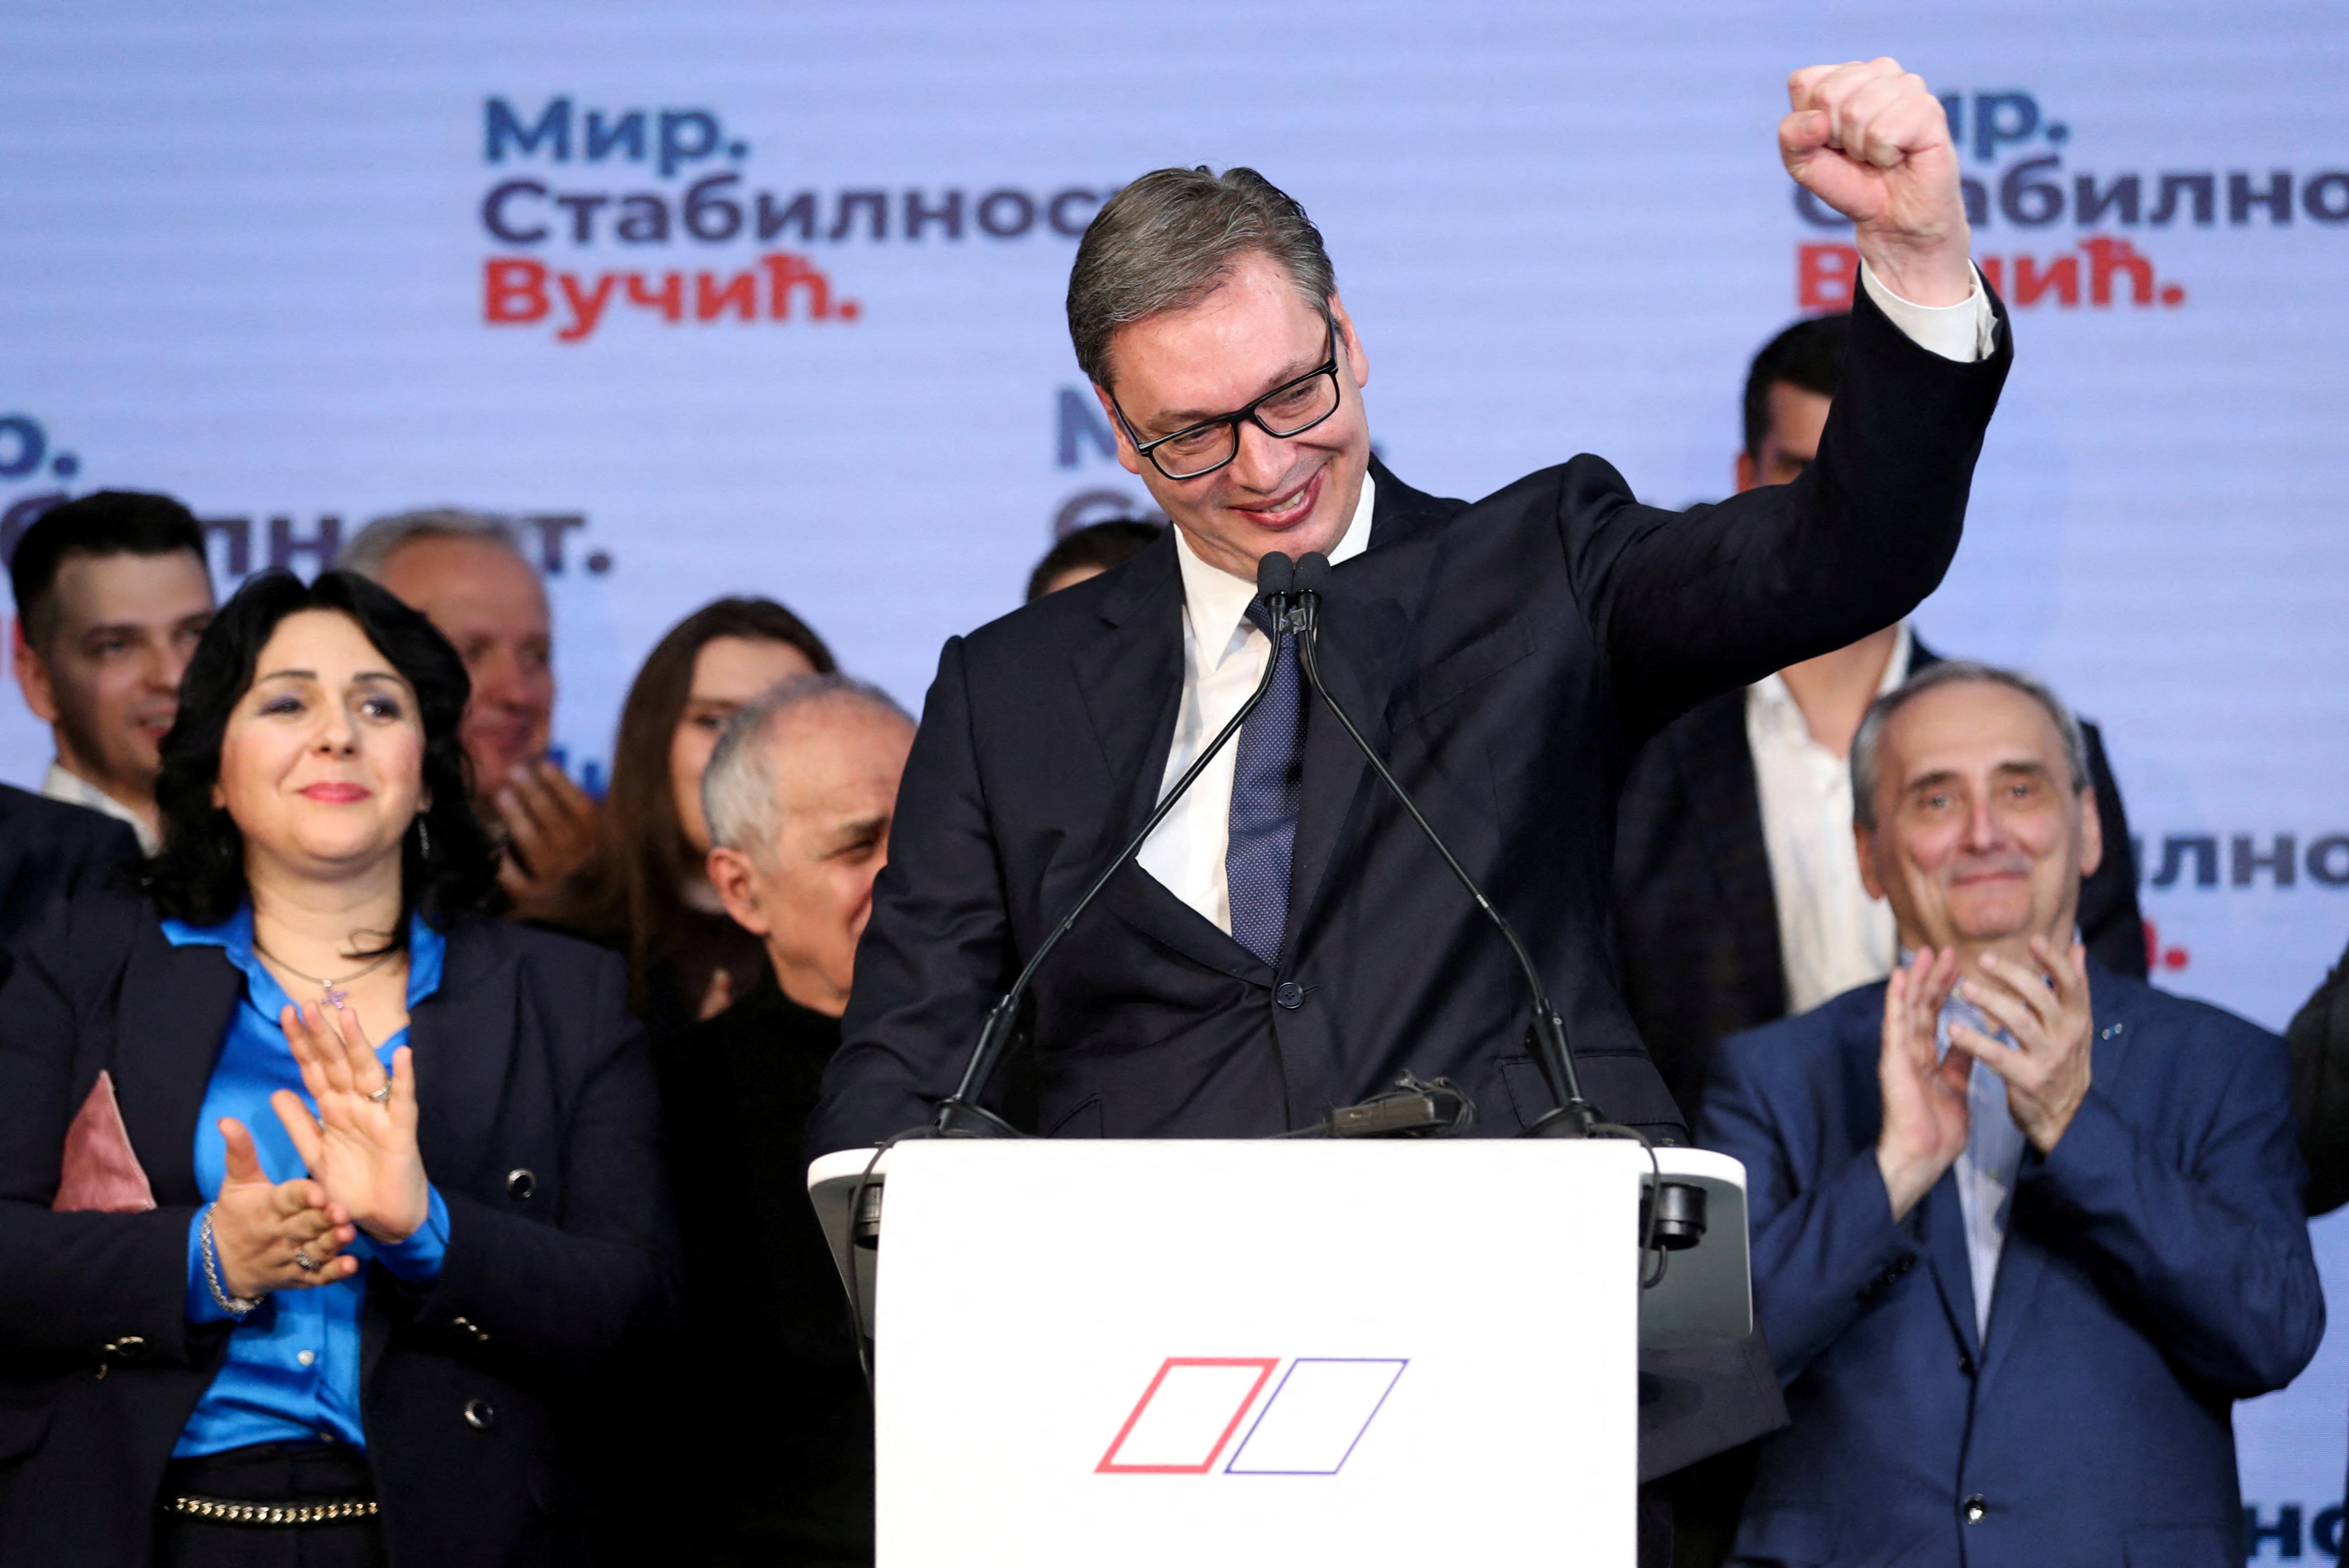 Mr Vucic has won 60 per cent of the vote, which is more than 2.2 million votes